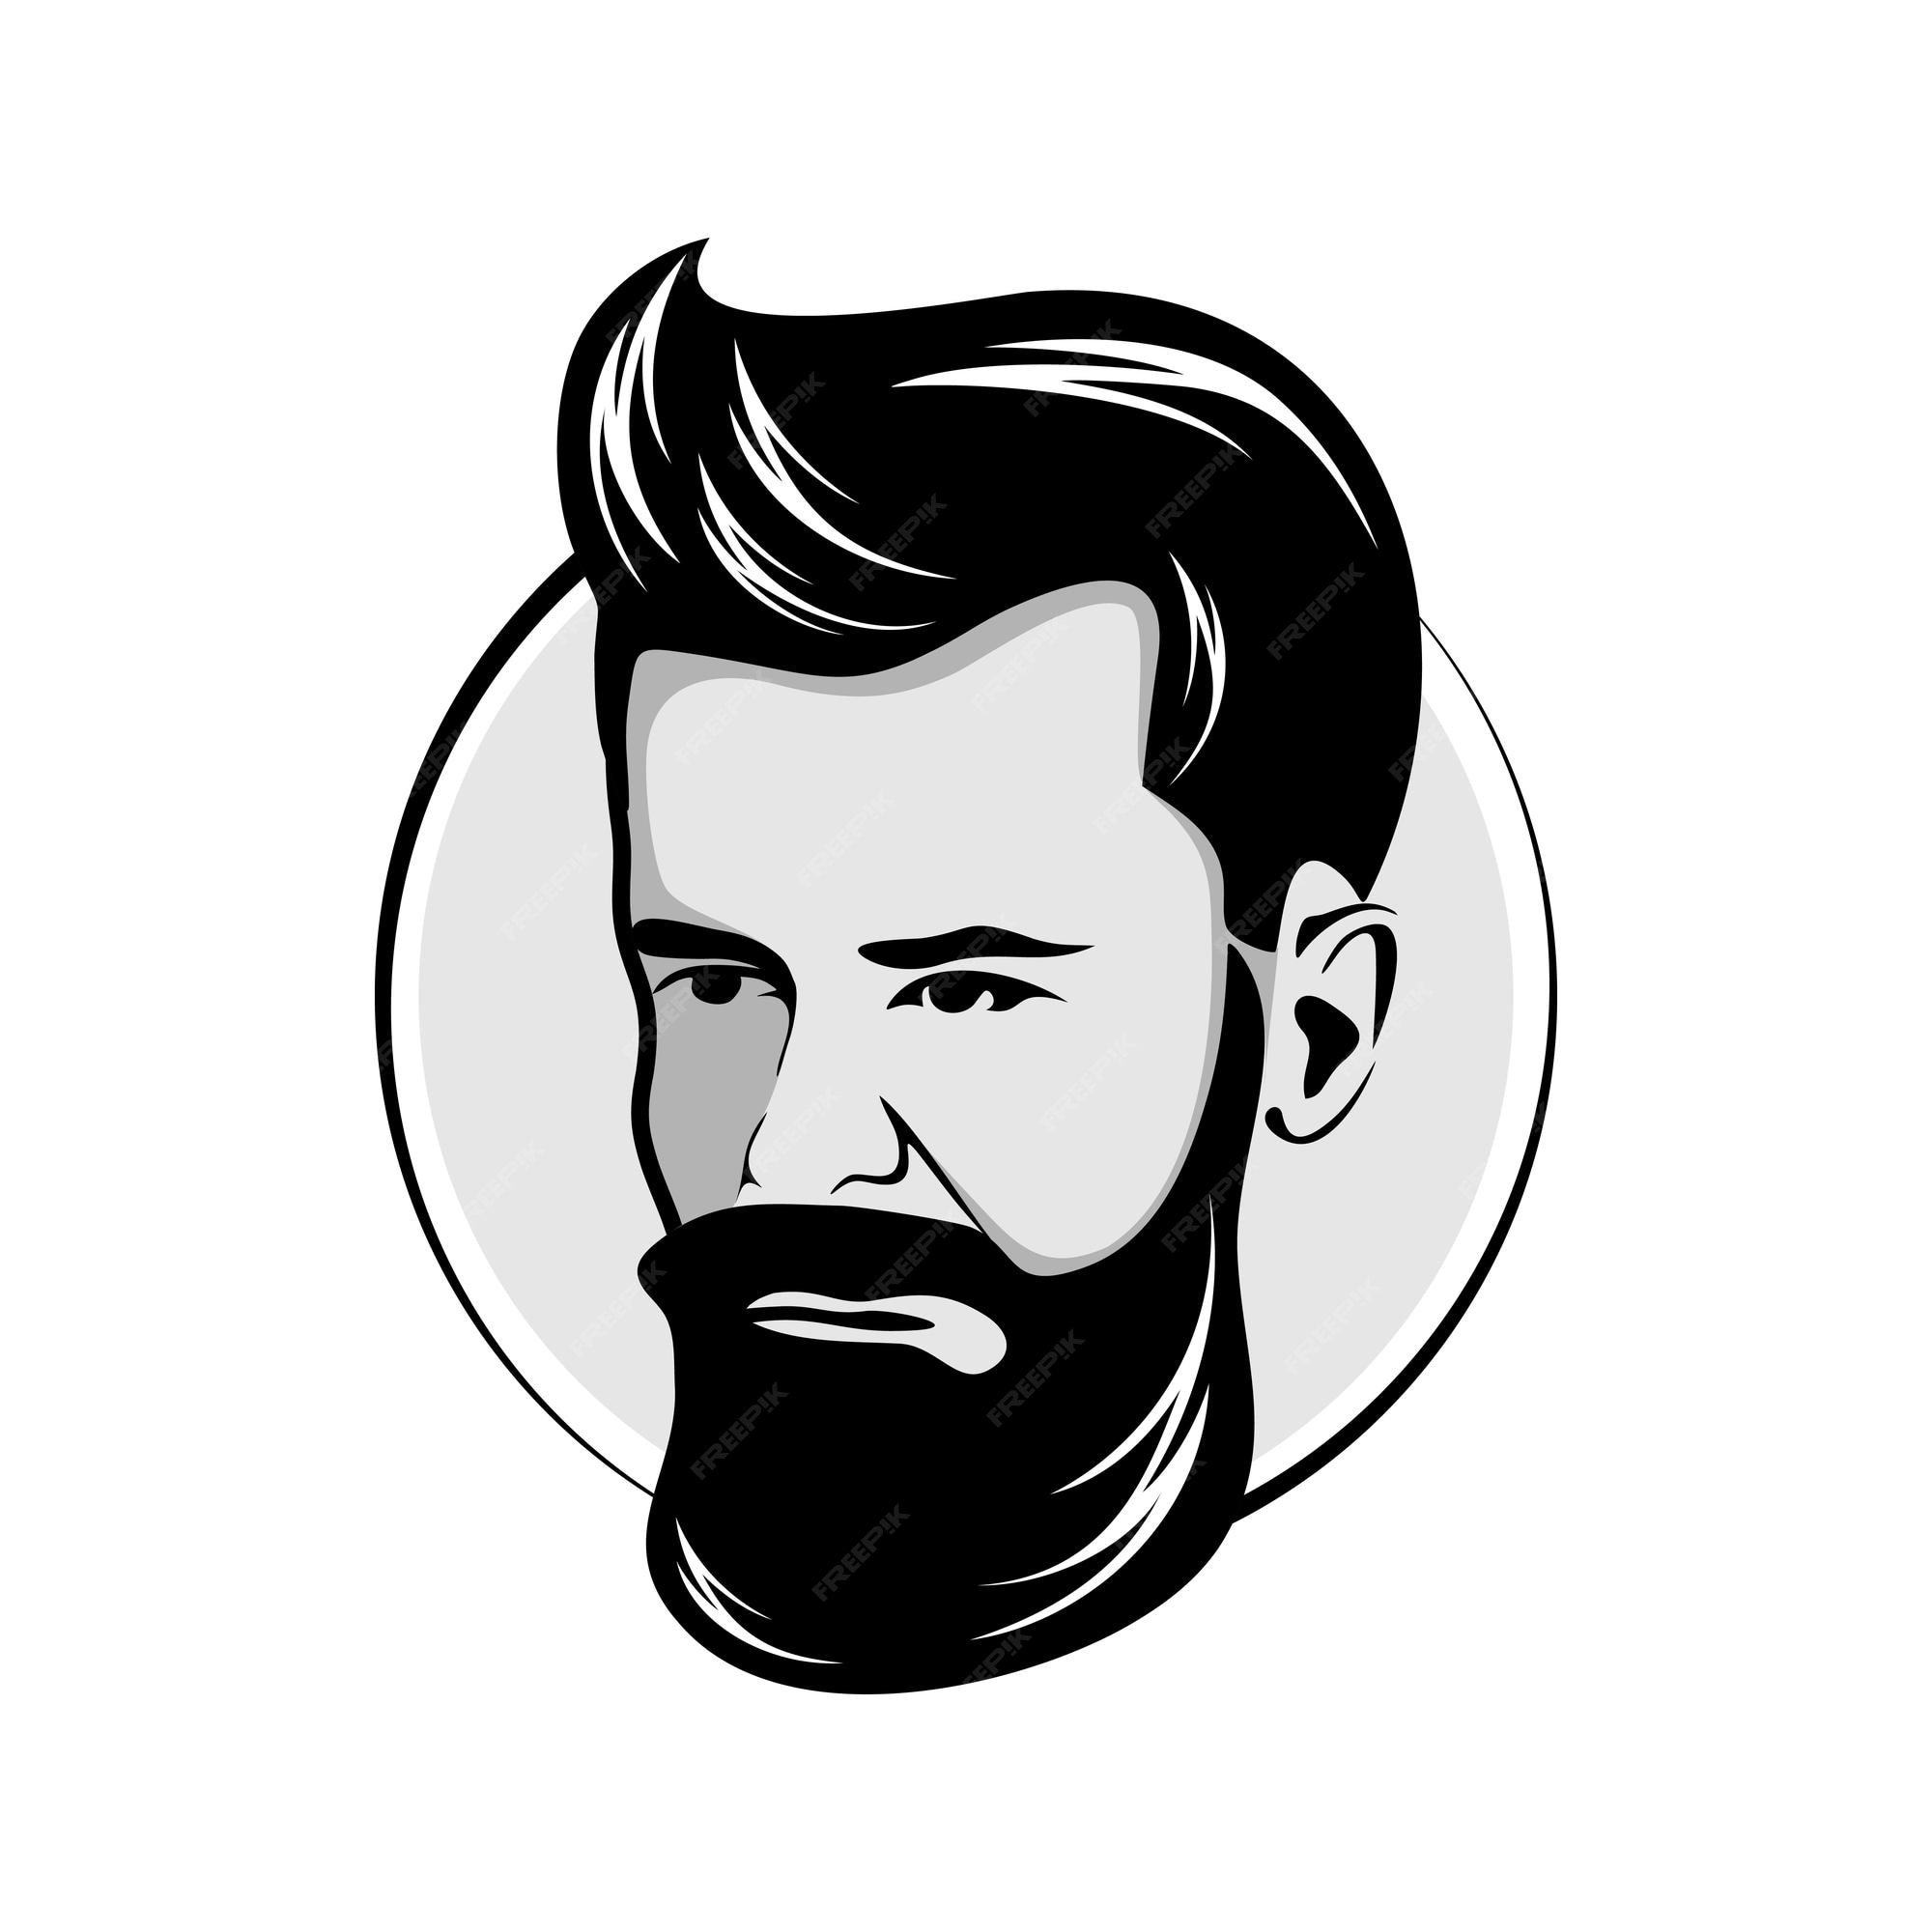 Premium Vector | Men's hairstyle with thick beard for barbershop logo.  vector illustration